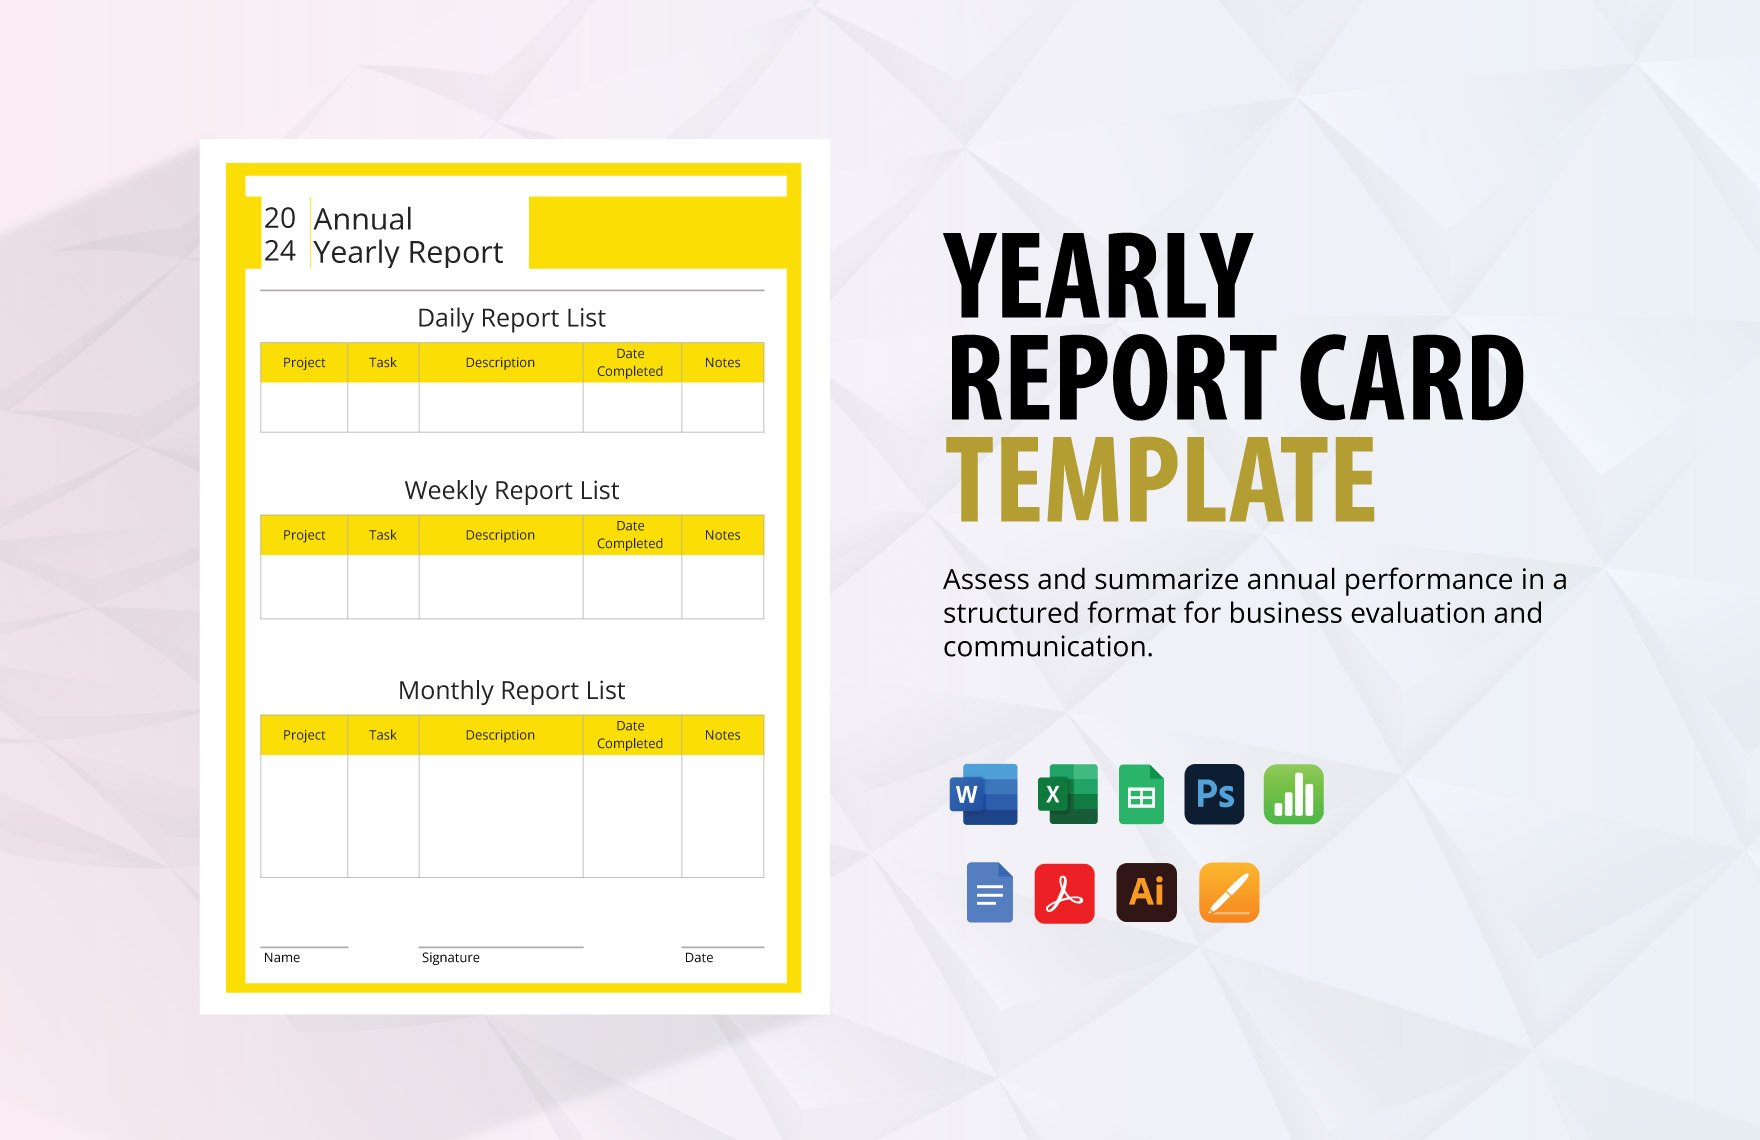 Yearly Report Card Template in Word, Google Docs, Excel, PDF, Google Sheets, Illustrator, PSD, Apple Pages, Apple Numbers